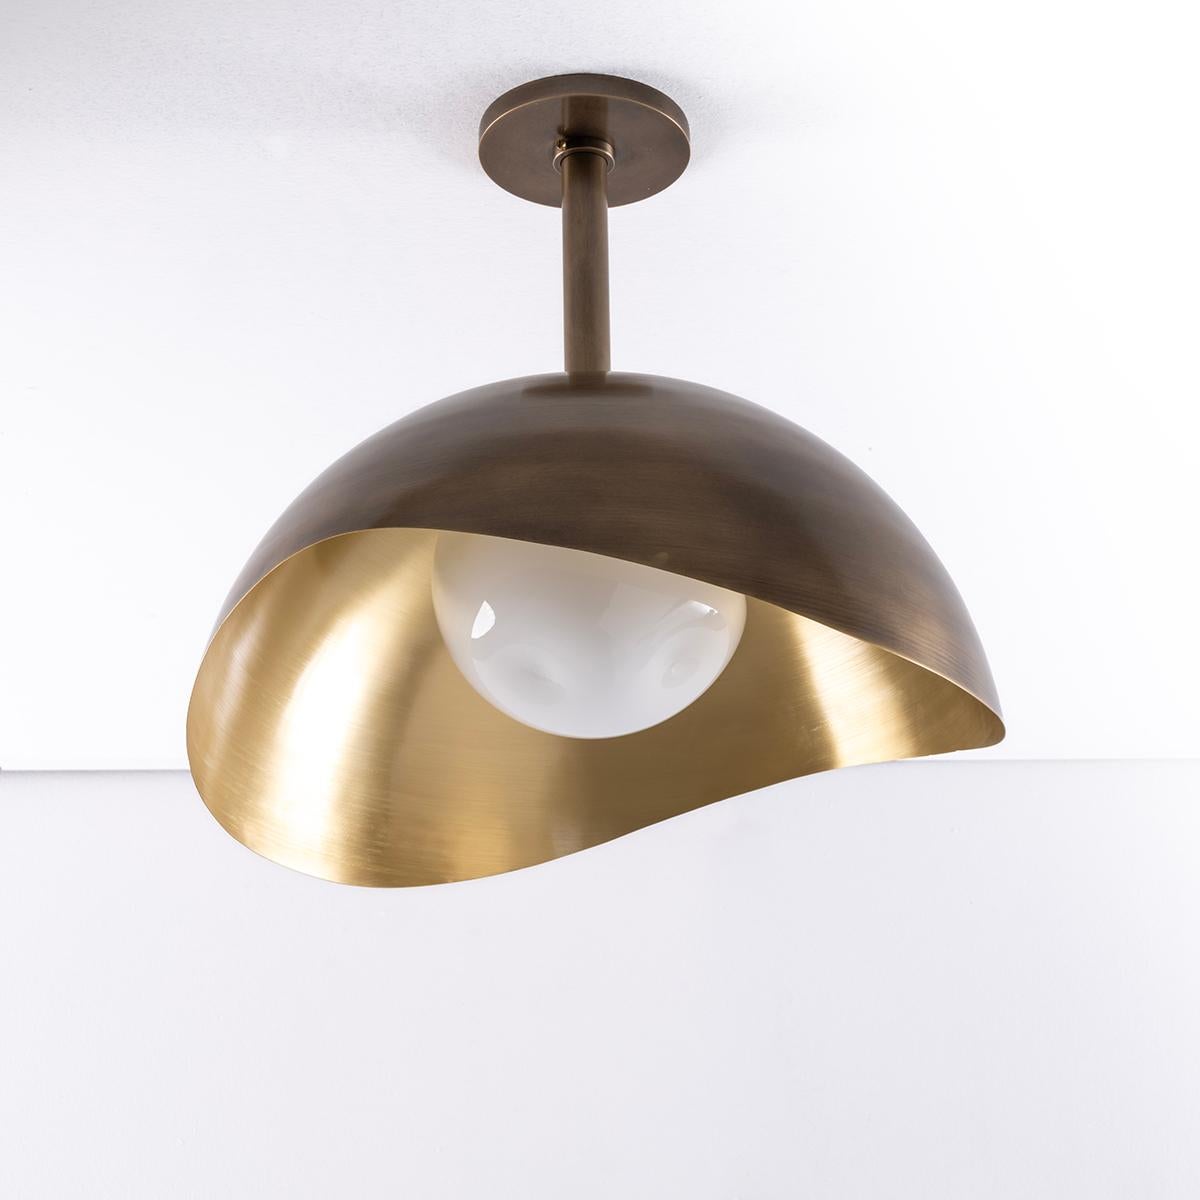 Perla Grande Ceiling Light  - Satin Brass Interior and Bronze Exterior In New Condition For Sale In New York, NY